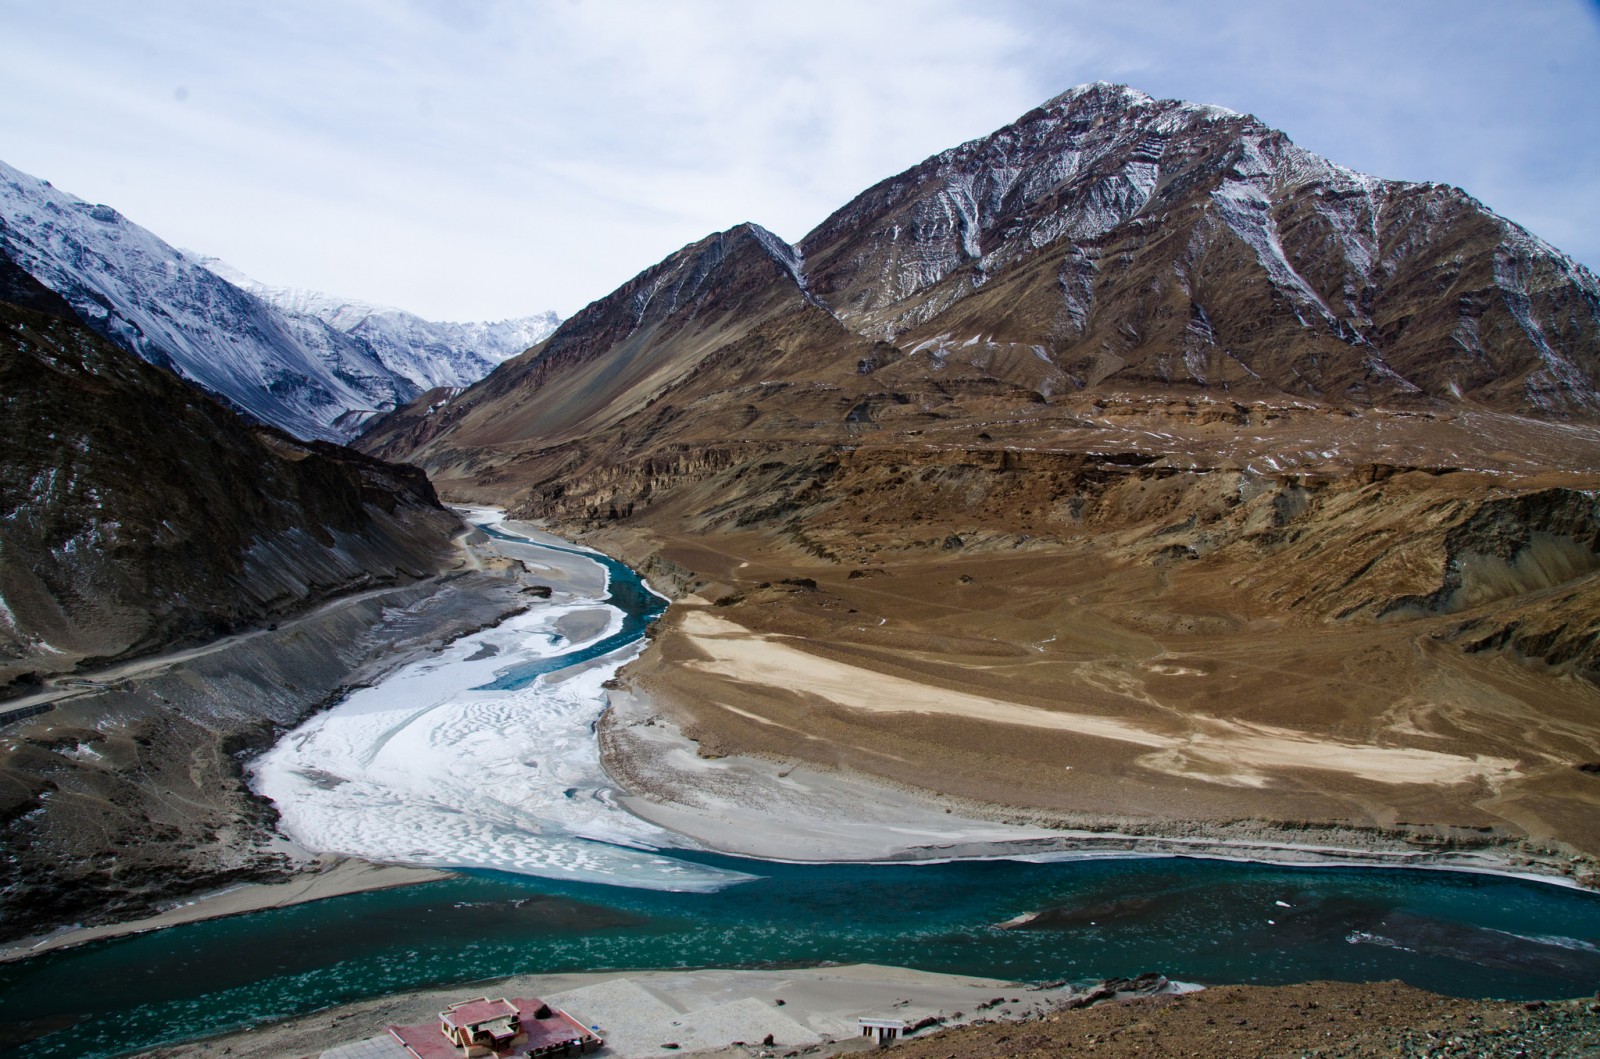 The Zanskar River joins the Indus River near Leh in Jammu and Kashmir. Though the Indus flows through India before reaching Pakistan, the 1960 Indus Water Treaty allocates the basin’s three eastern rivers to India and its three western rivers to Pakistan. Photo courtesy Pradeep Kumbhashi via Flickr Creative Commons 